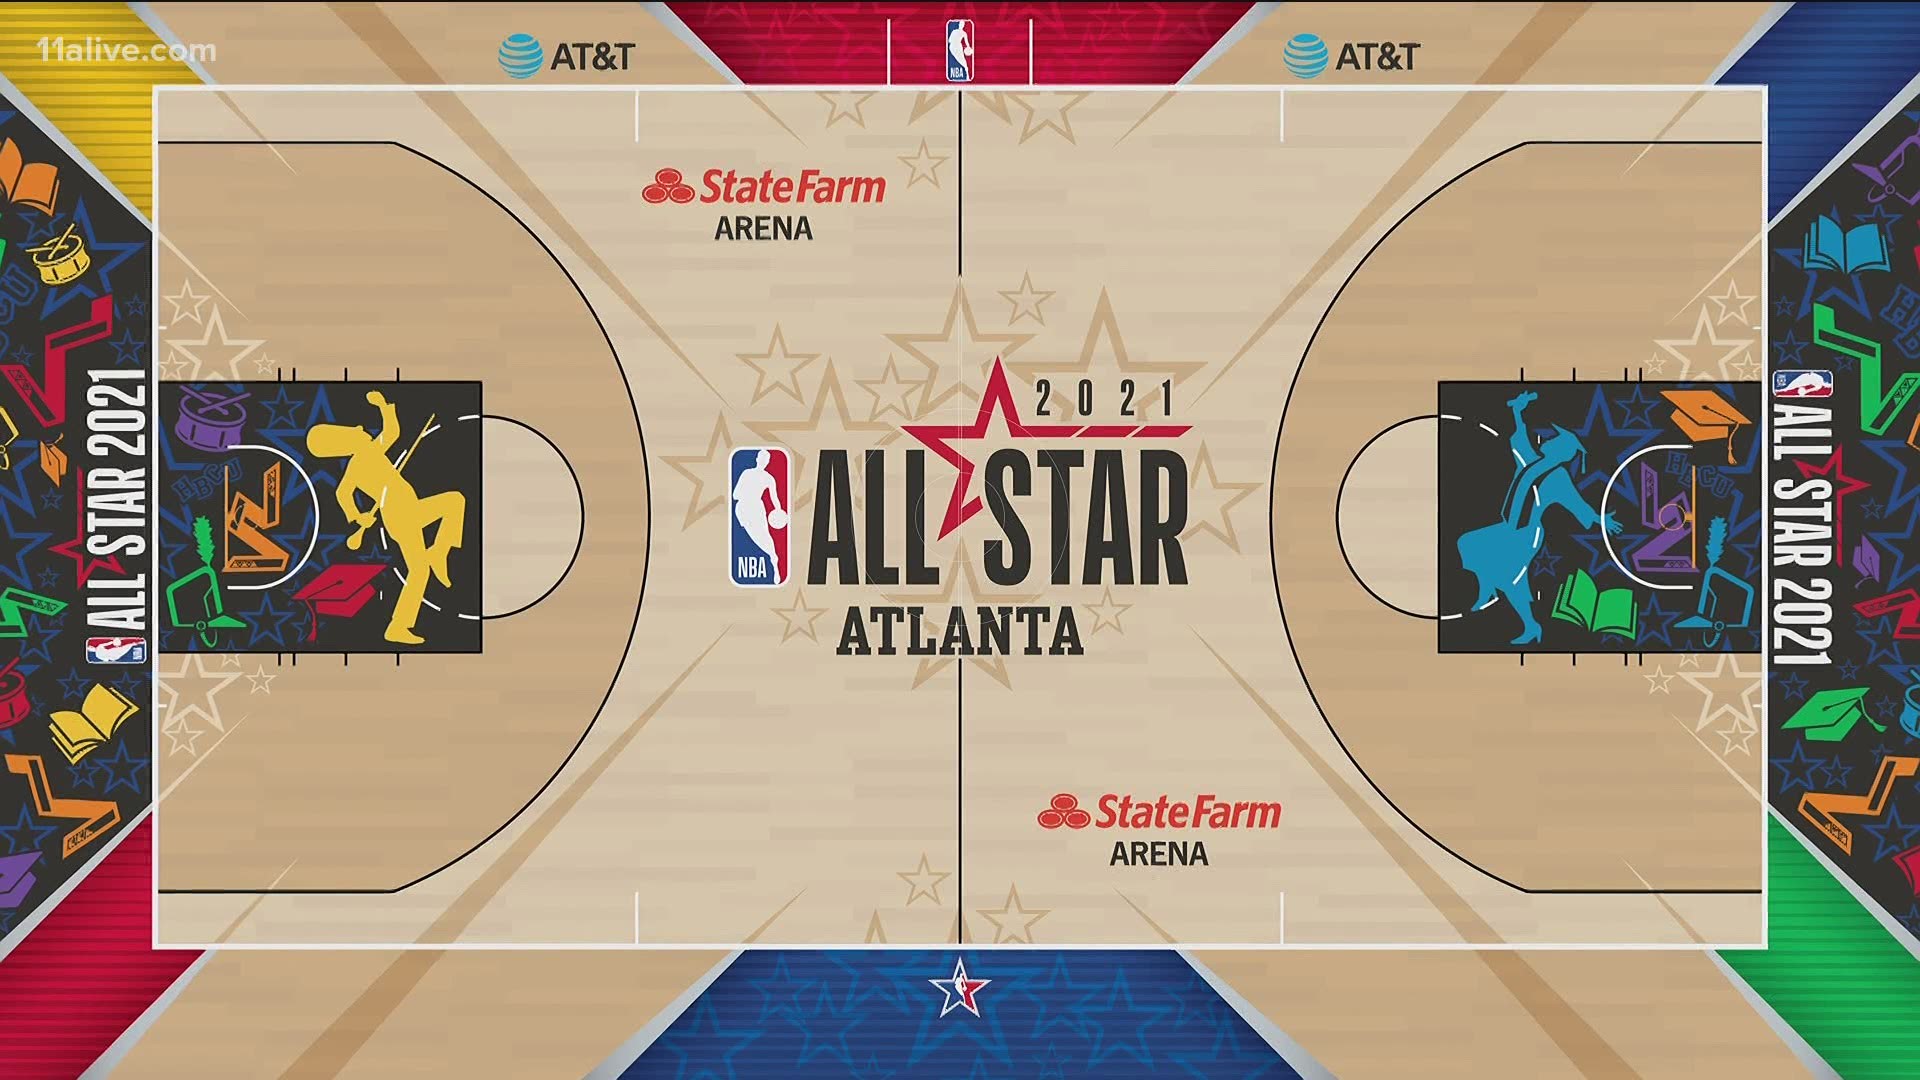 Here's a look at what the court will look like for Sunday's game.